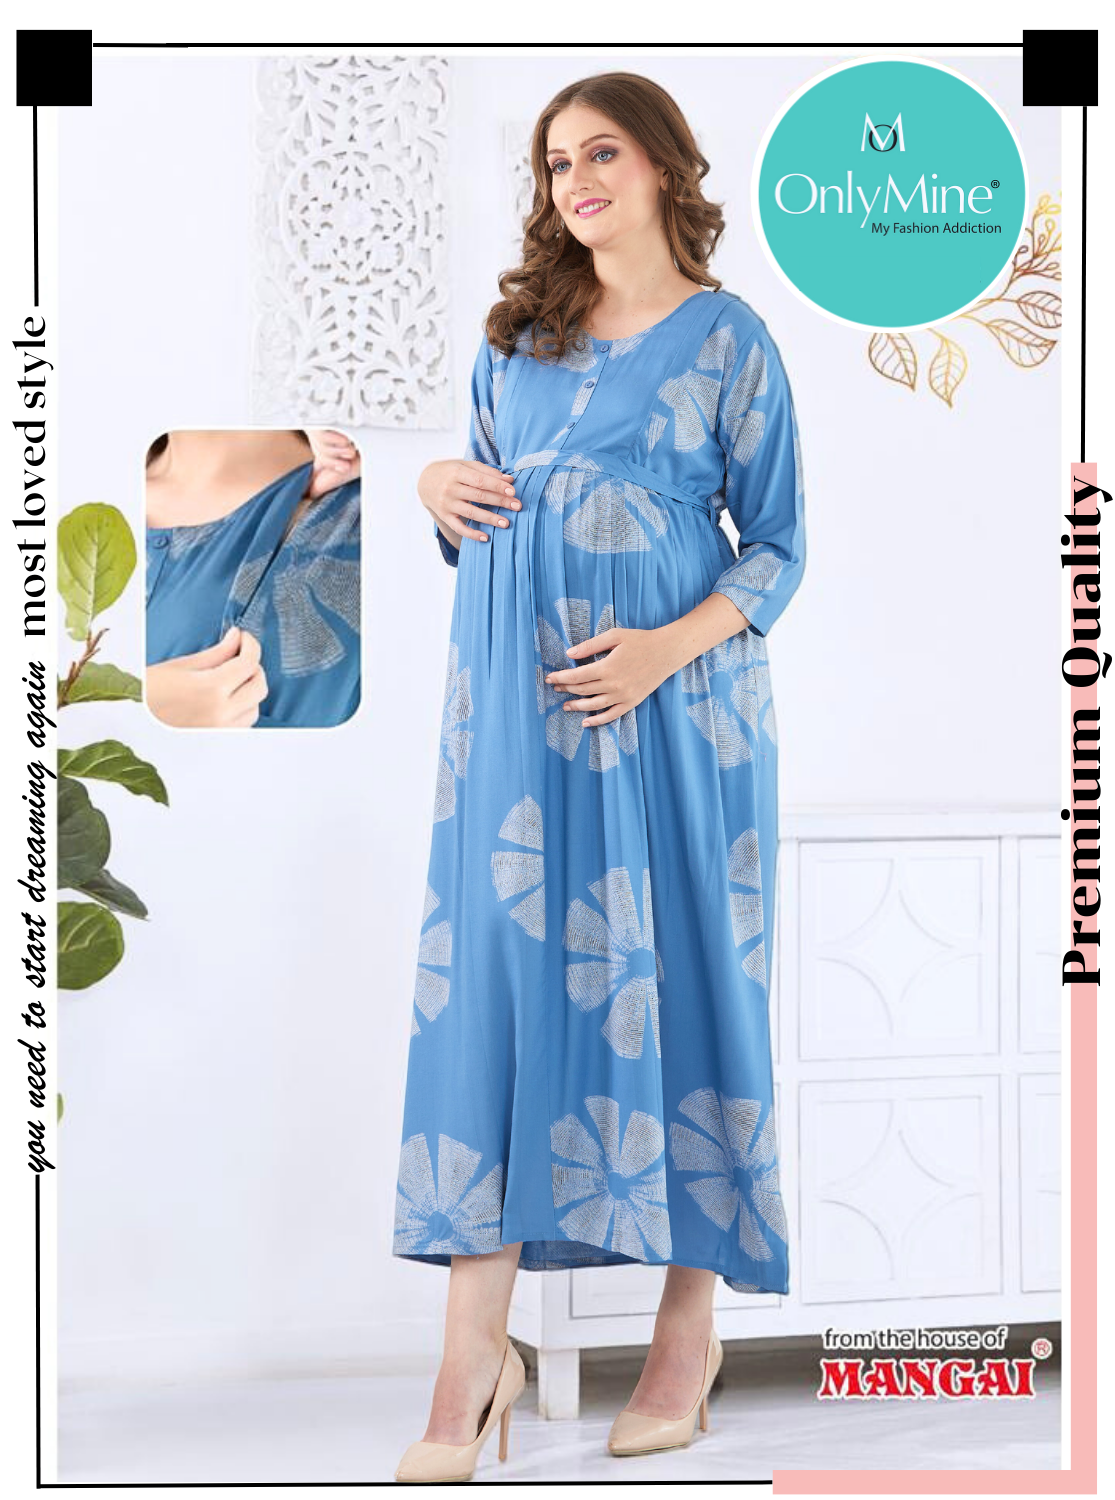 New ONLY MINE Premium 4-IN-ONE Mom's Wear - Soft & Smooth Rayon | Maternity | Feeding | Long Frock | Casual Wear for Pregnancy Women's